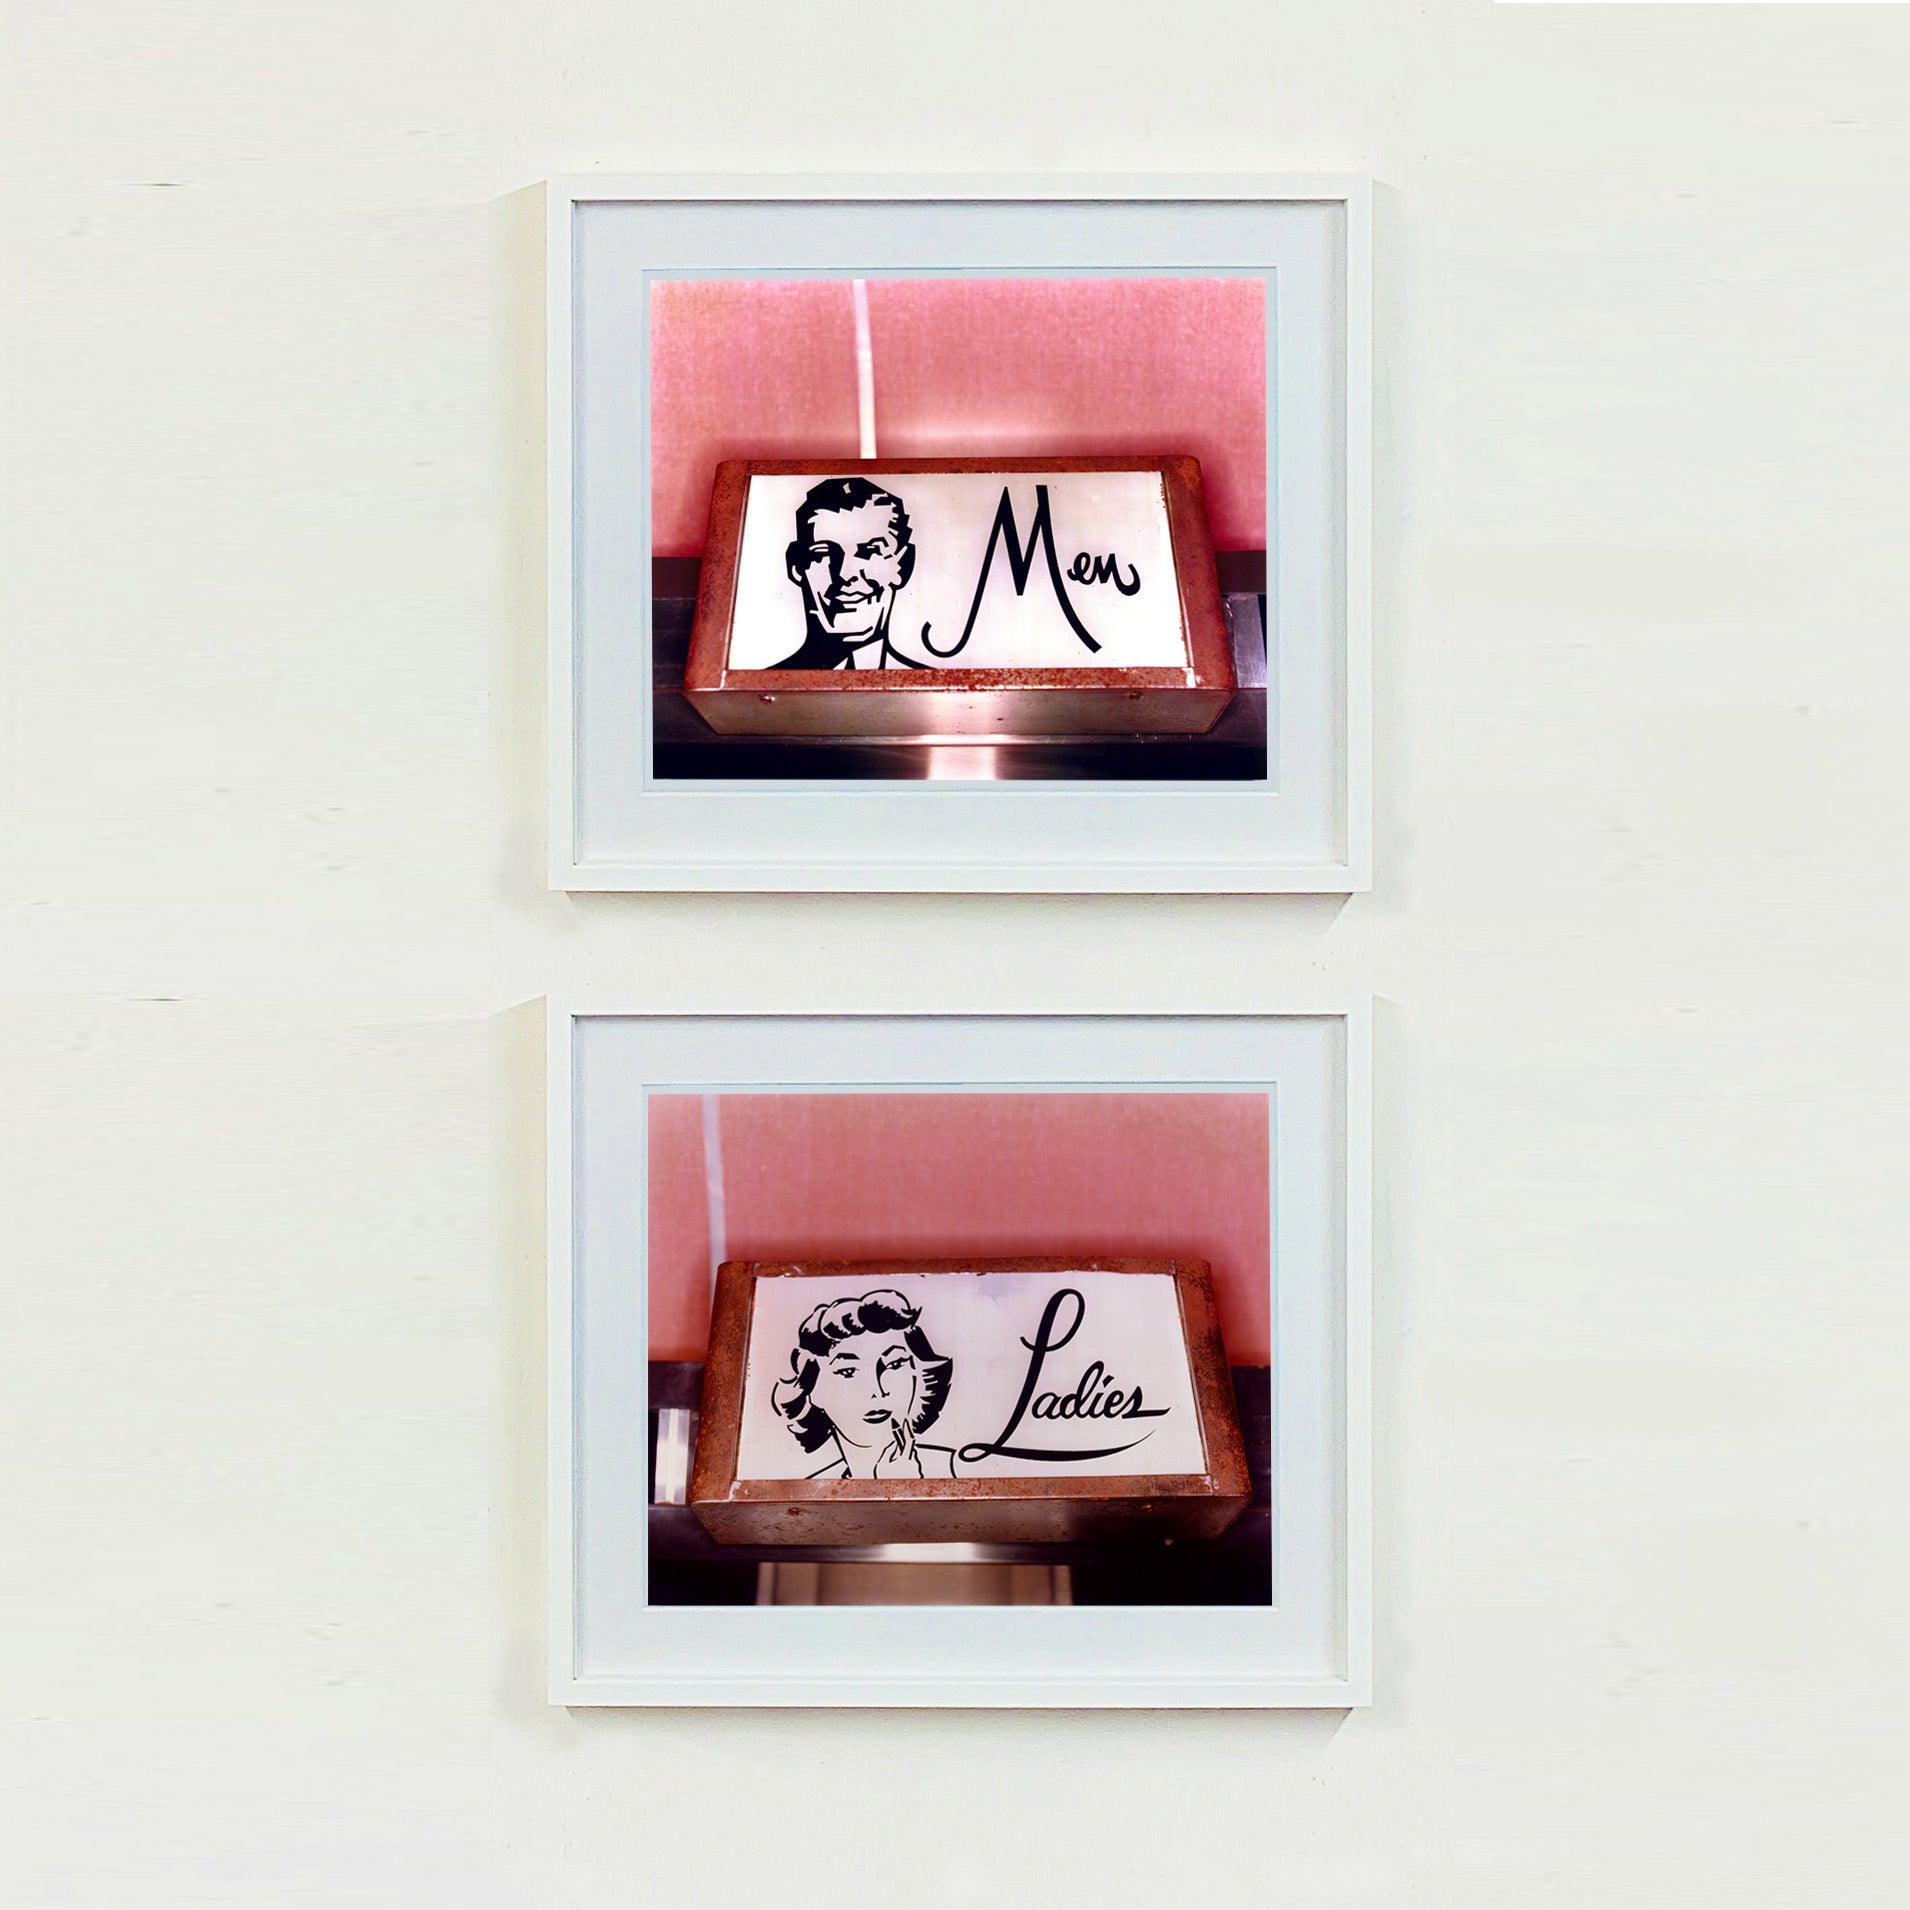 2 white framed photographs by Richard Heeps. Two kitsch toilet signs. Both photographs have a sign one with the word Men and one with Ladies which sits alongside an outline of 1950s man and woman respectively. The signs sit in a wooden frame against a pink tiled wall.